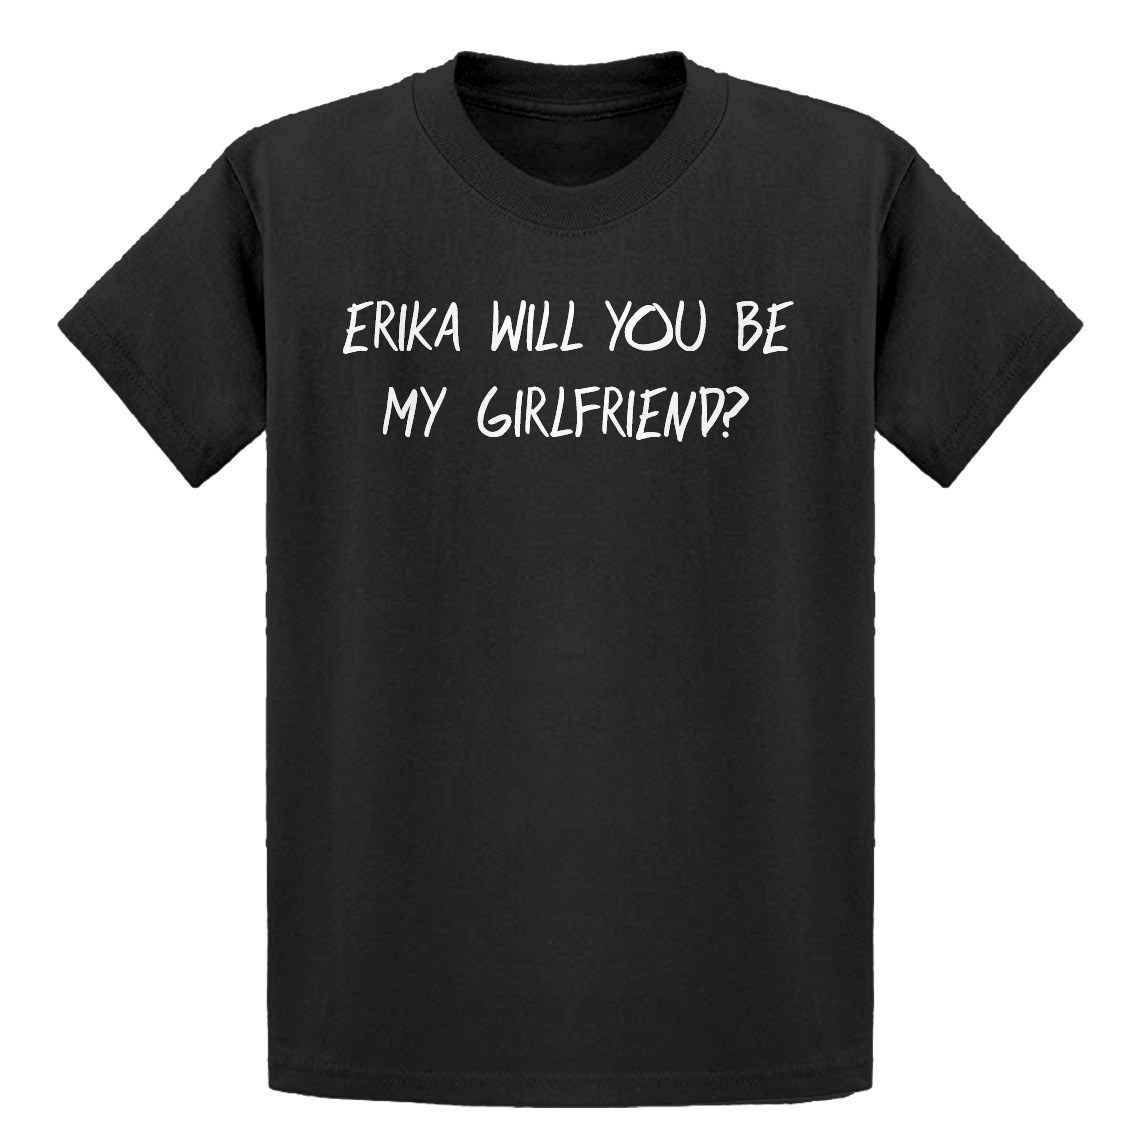 Indica Plateau Youth Erika Will You be My Girlfriend Kids T-Shirt 